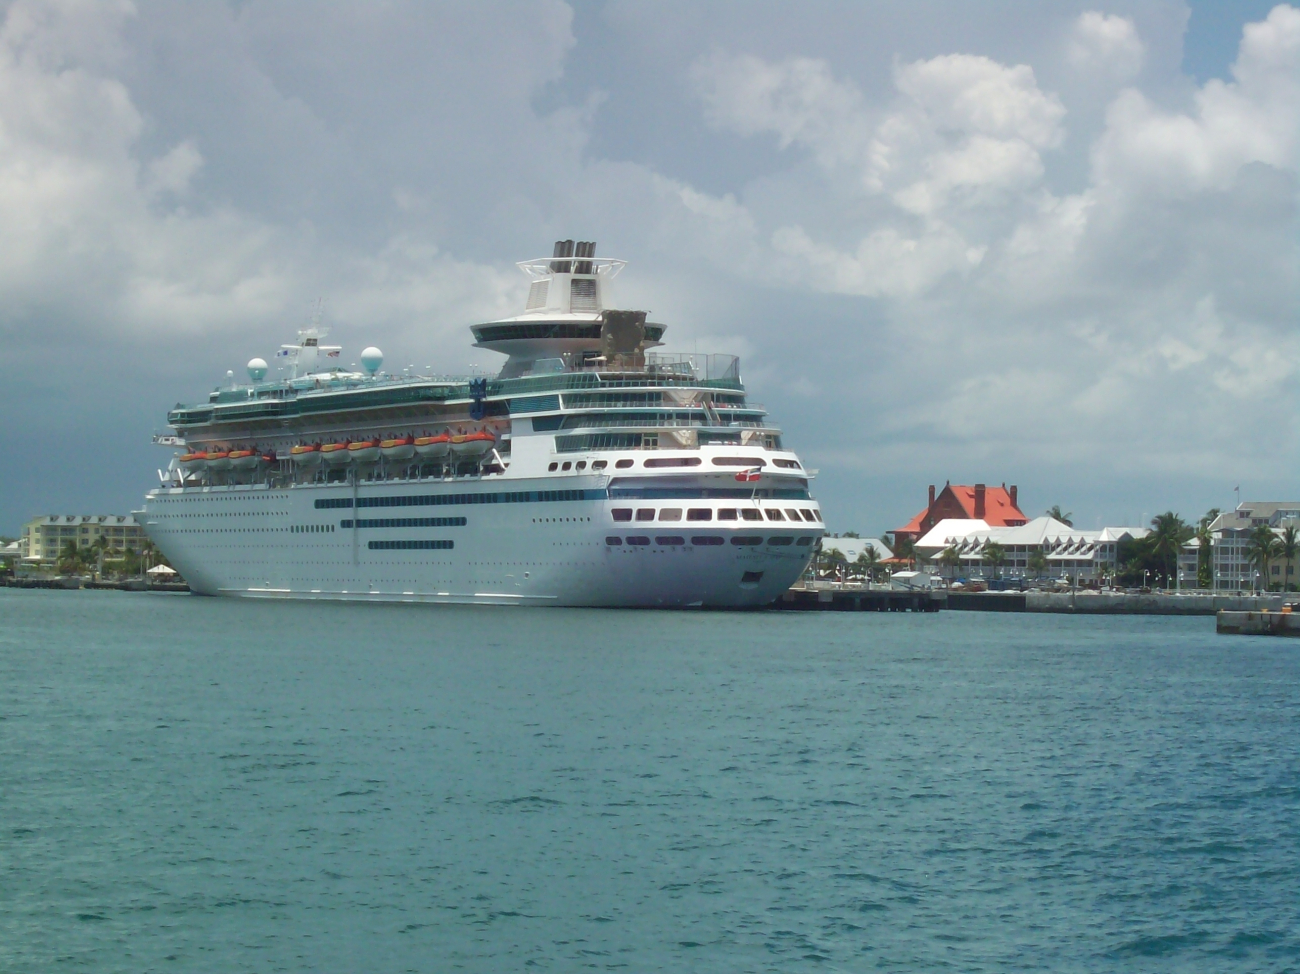 A large cruise ship in Key West